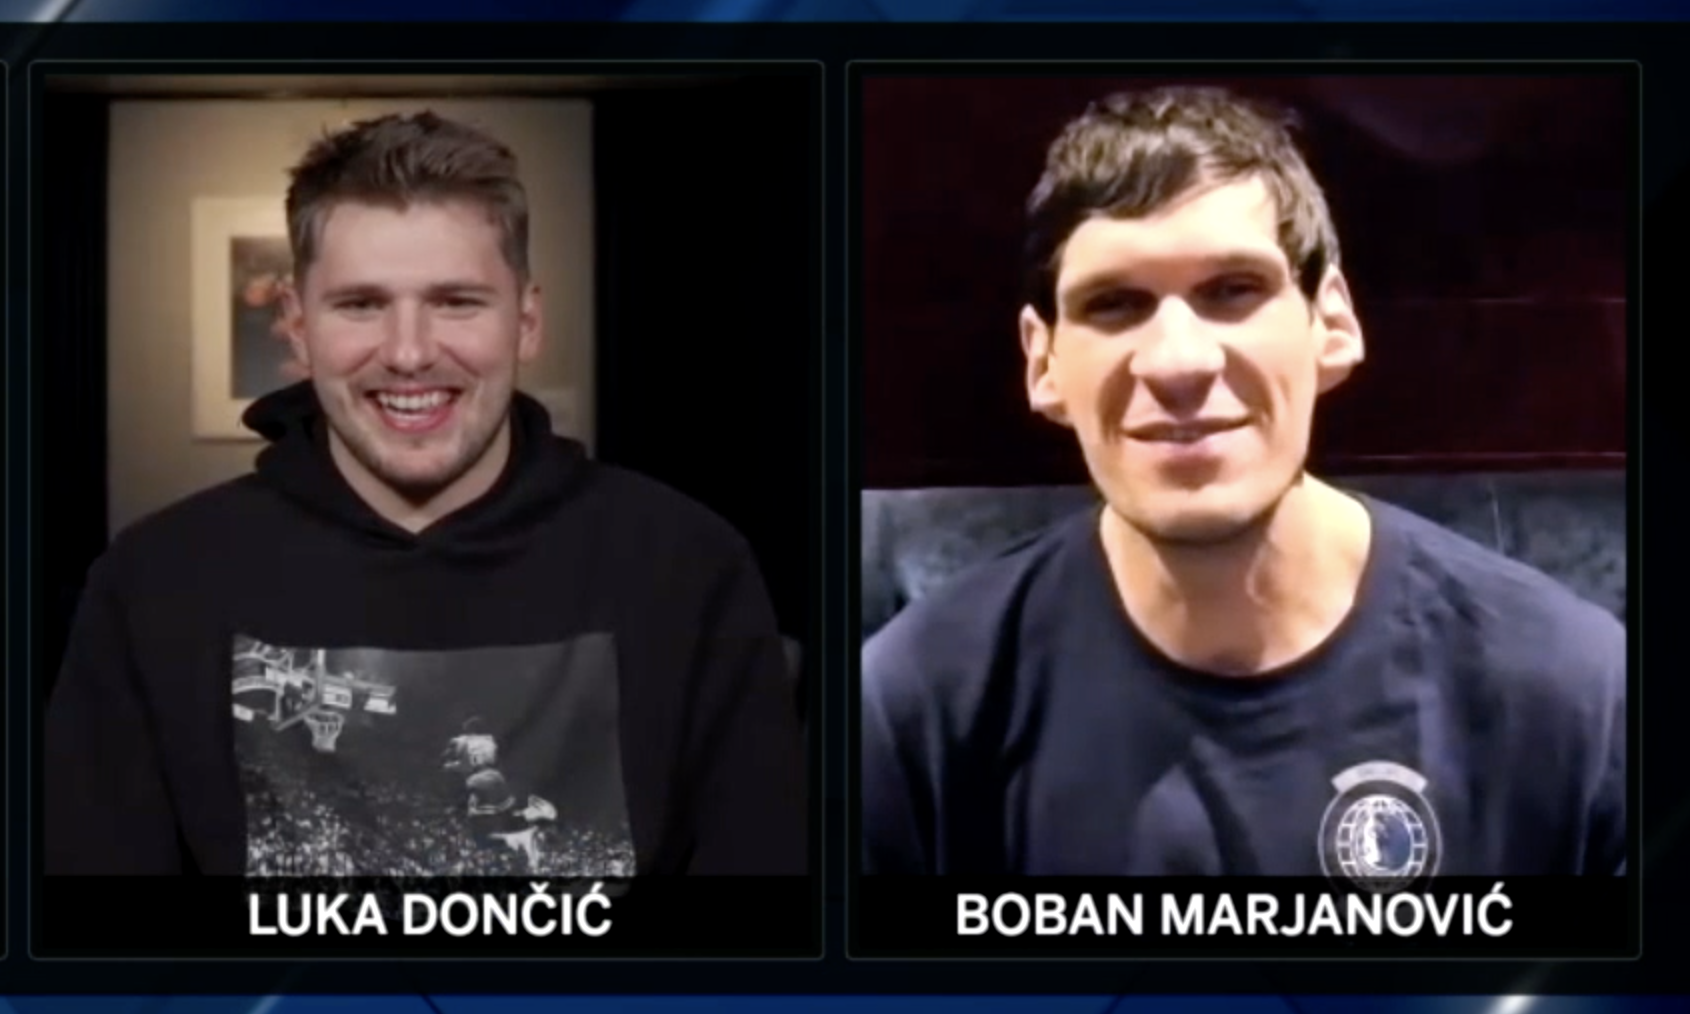 Mavs Tipoff Show: Players share their favorite stories and more with fans during special program